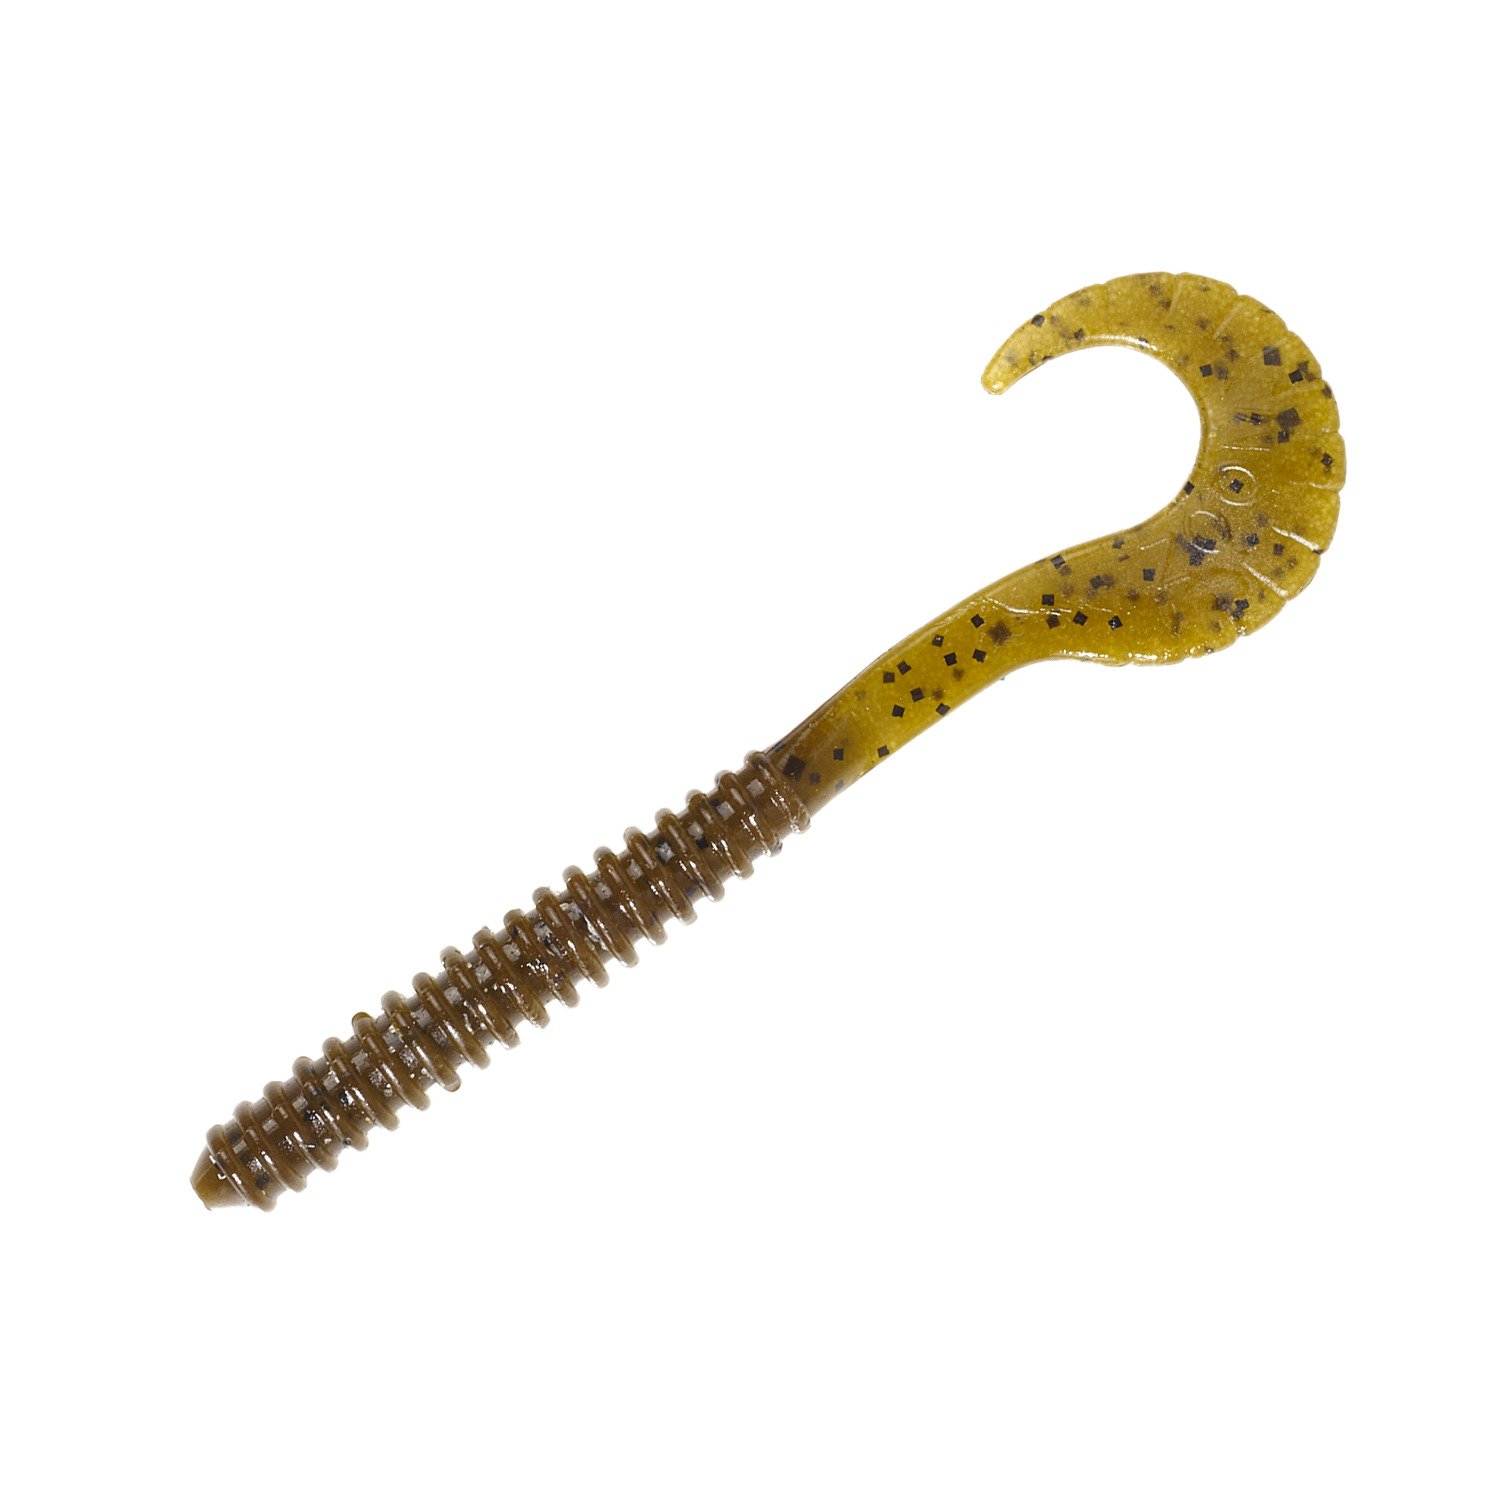 Zoom Curly Tail Worms (4) (20 pk) - Angler's Headquarters